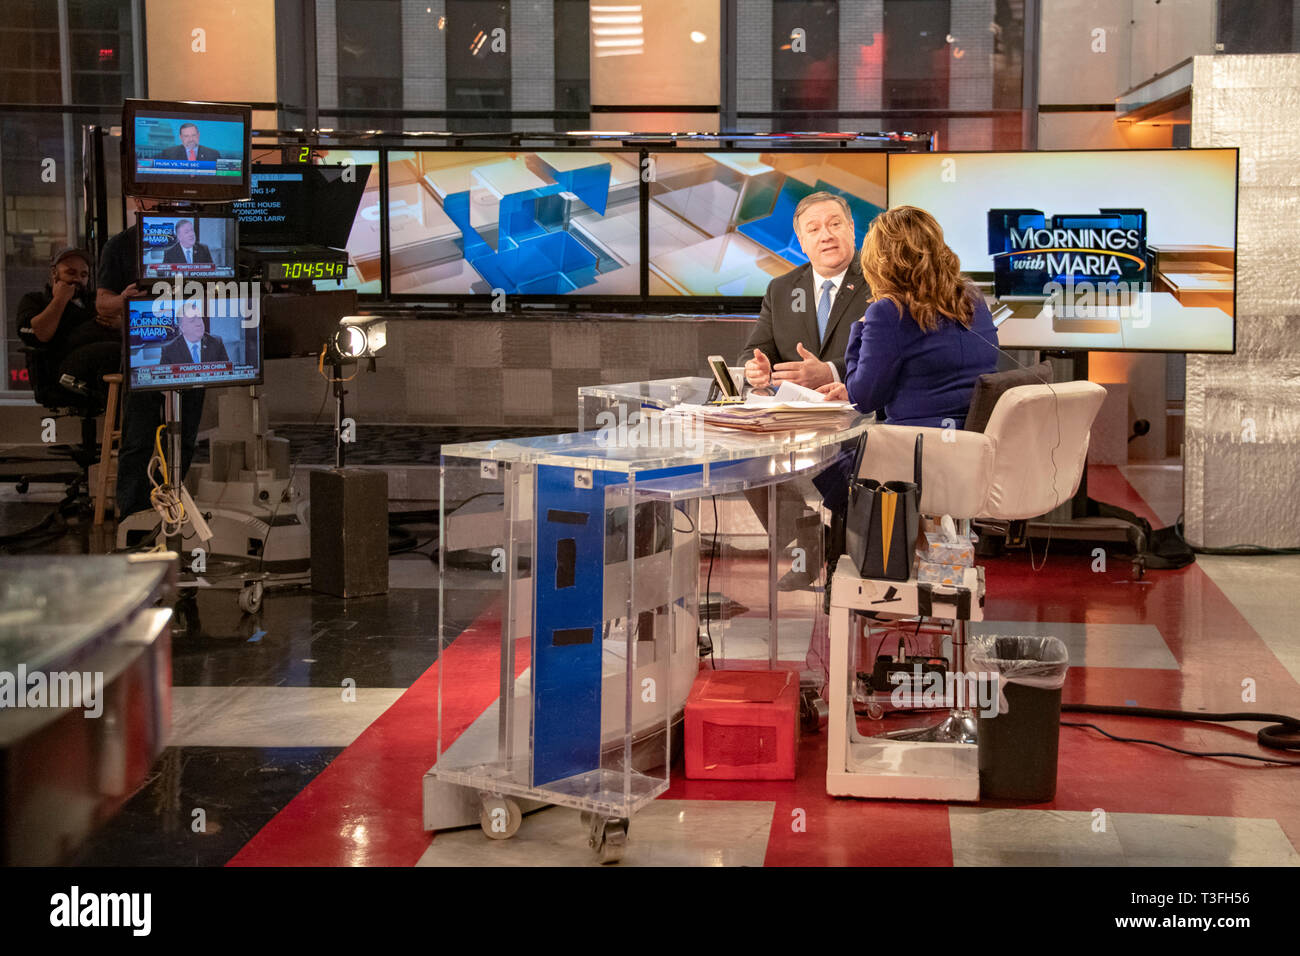 U.S. Secretary of State Mike Pompeo, left, during a television interview with Maria Bartiromo on FOX Business Network Morning with Maria talk show April 5, 2019 in New York City, NY. Stock Photo